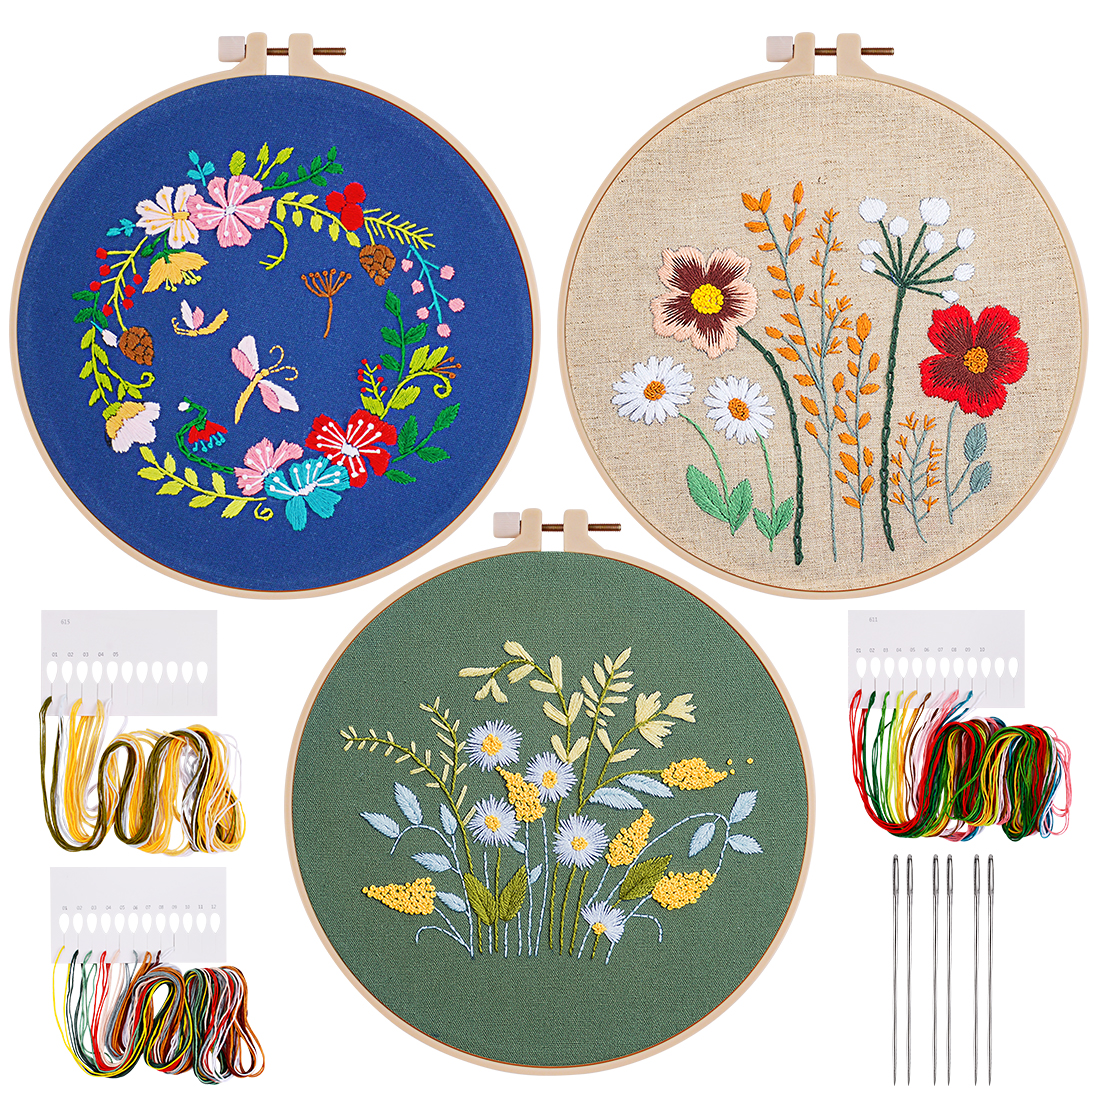 Brizi Living 3 Sets Flower Pattern Embroidery Starter Kit for Beginners,Stamped Cross Stitch Kits for Beginners Adults Include Embroidery Fabric